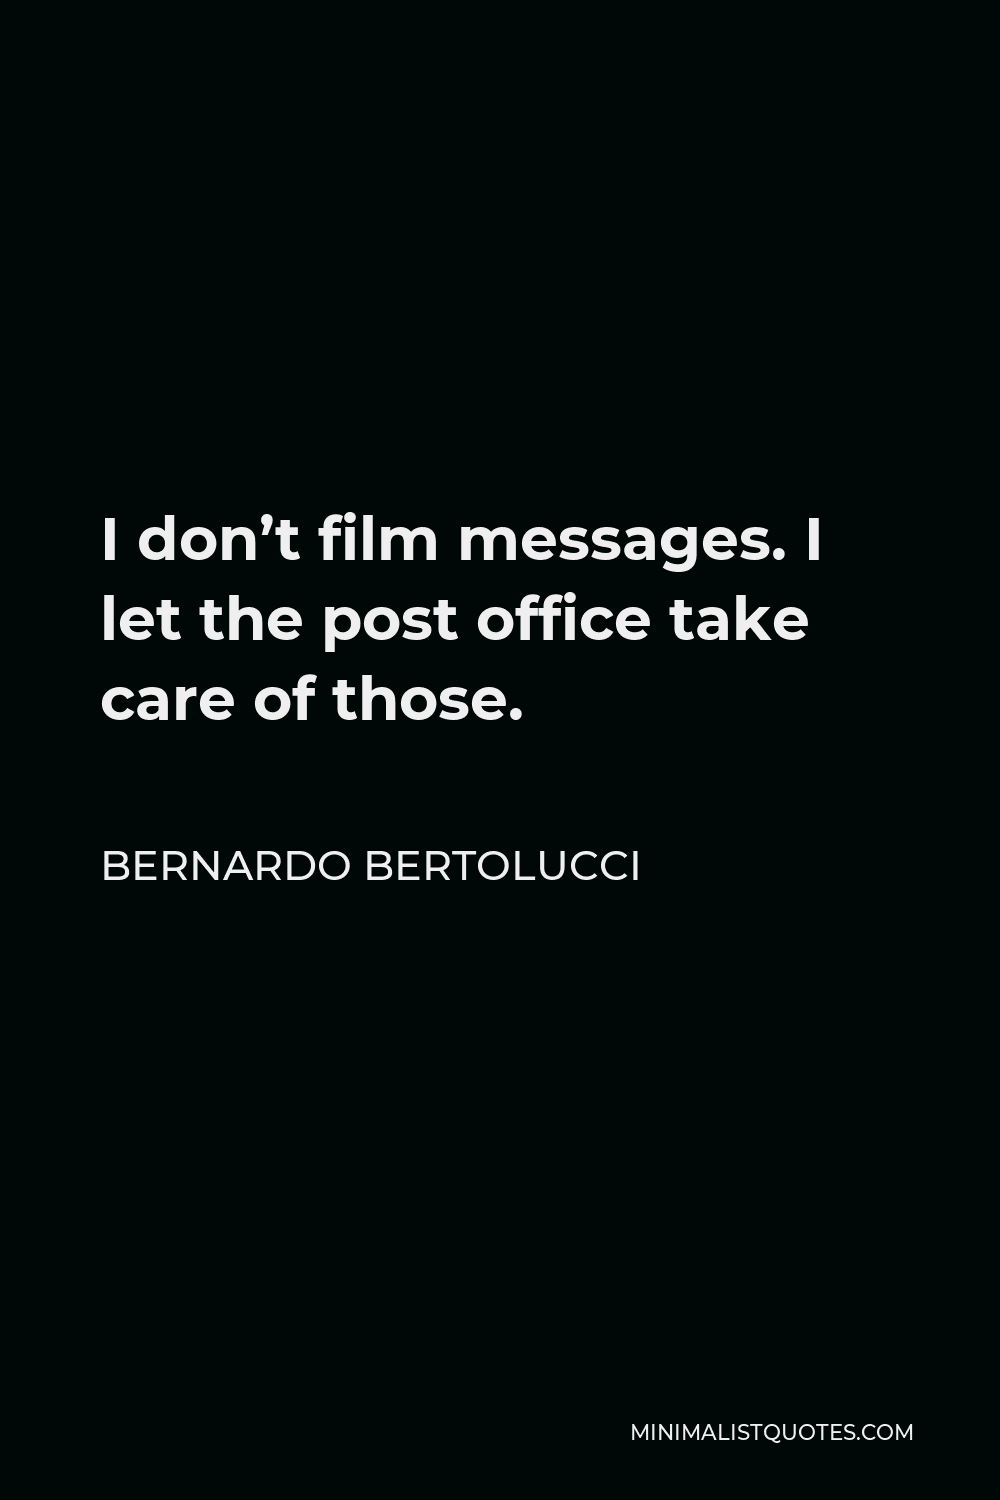 Bernardo Bertolucci Quote - I don’t film messages. I let the post office take care of those.